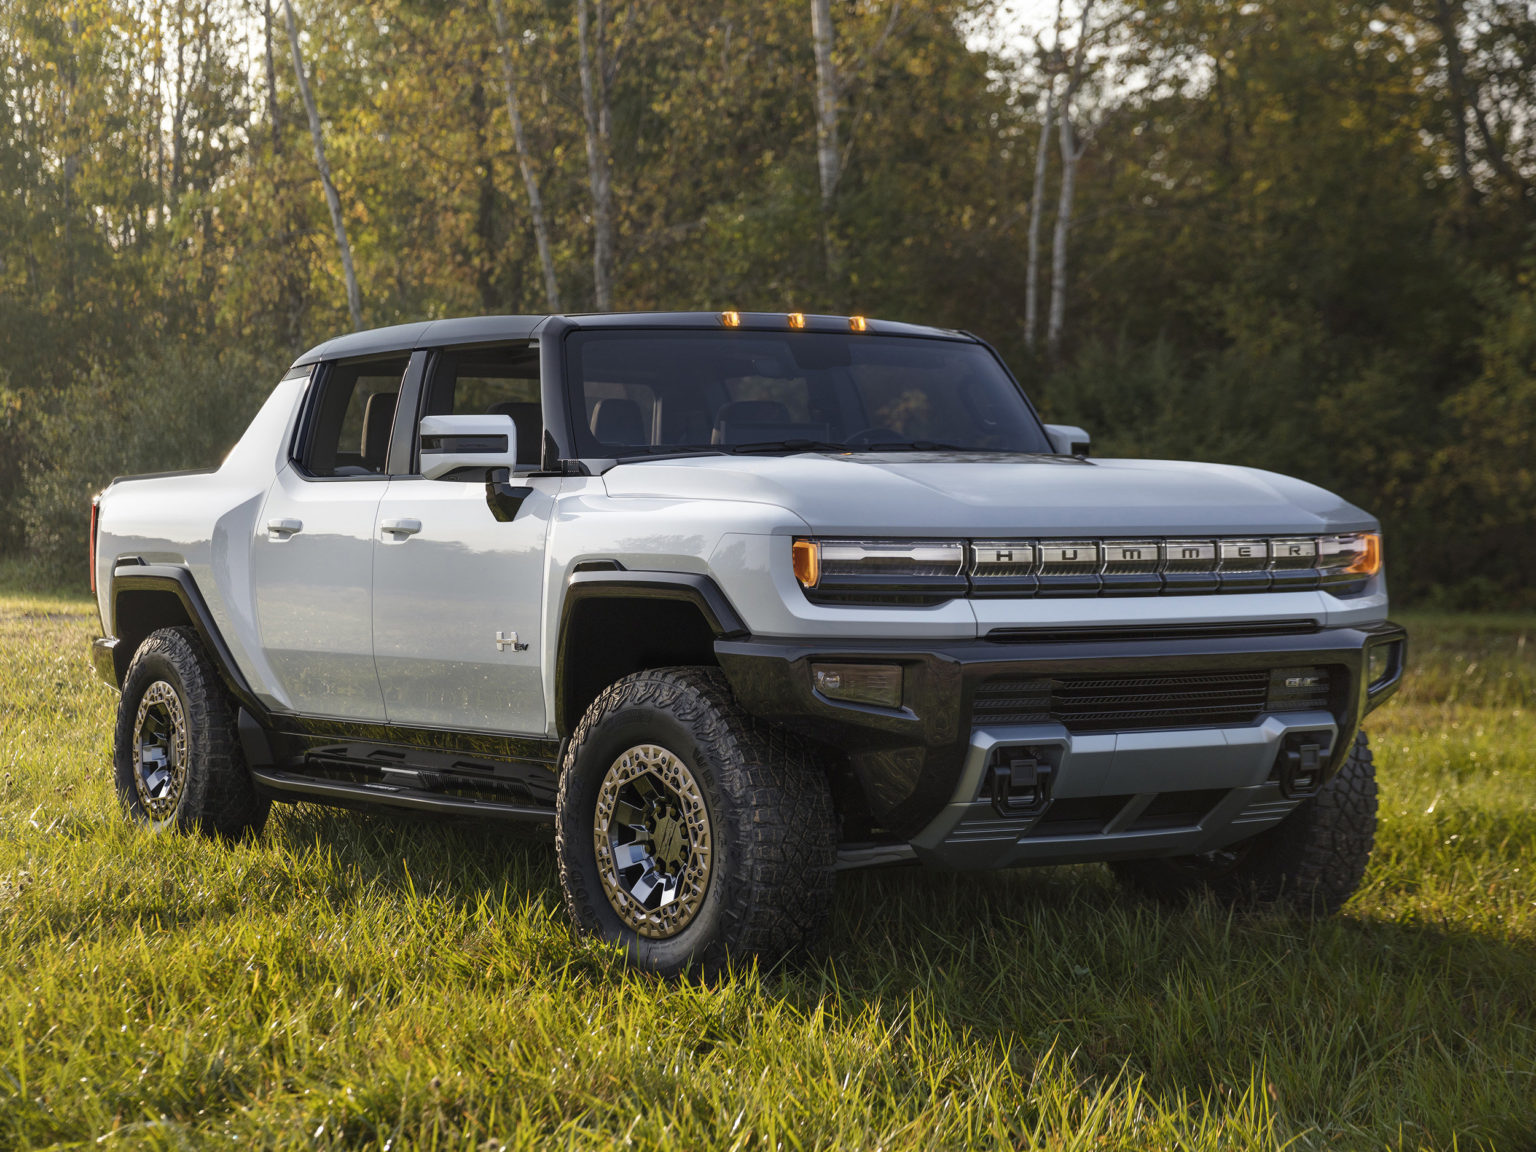 The GMC Hummer Edition 1 is the first Hummer EV that will be avaalibe.